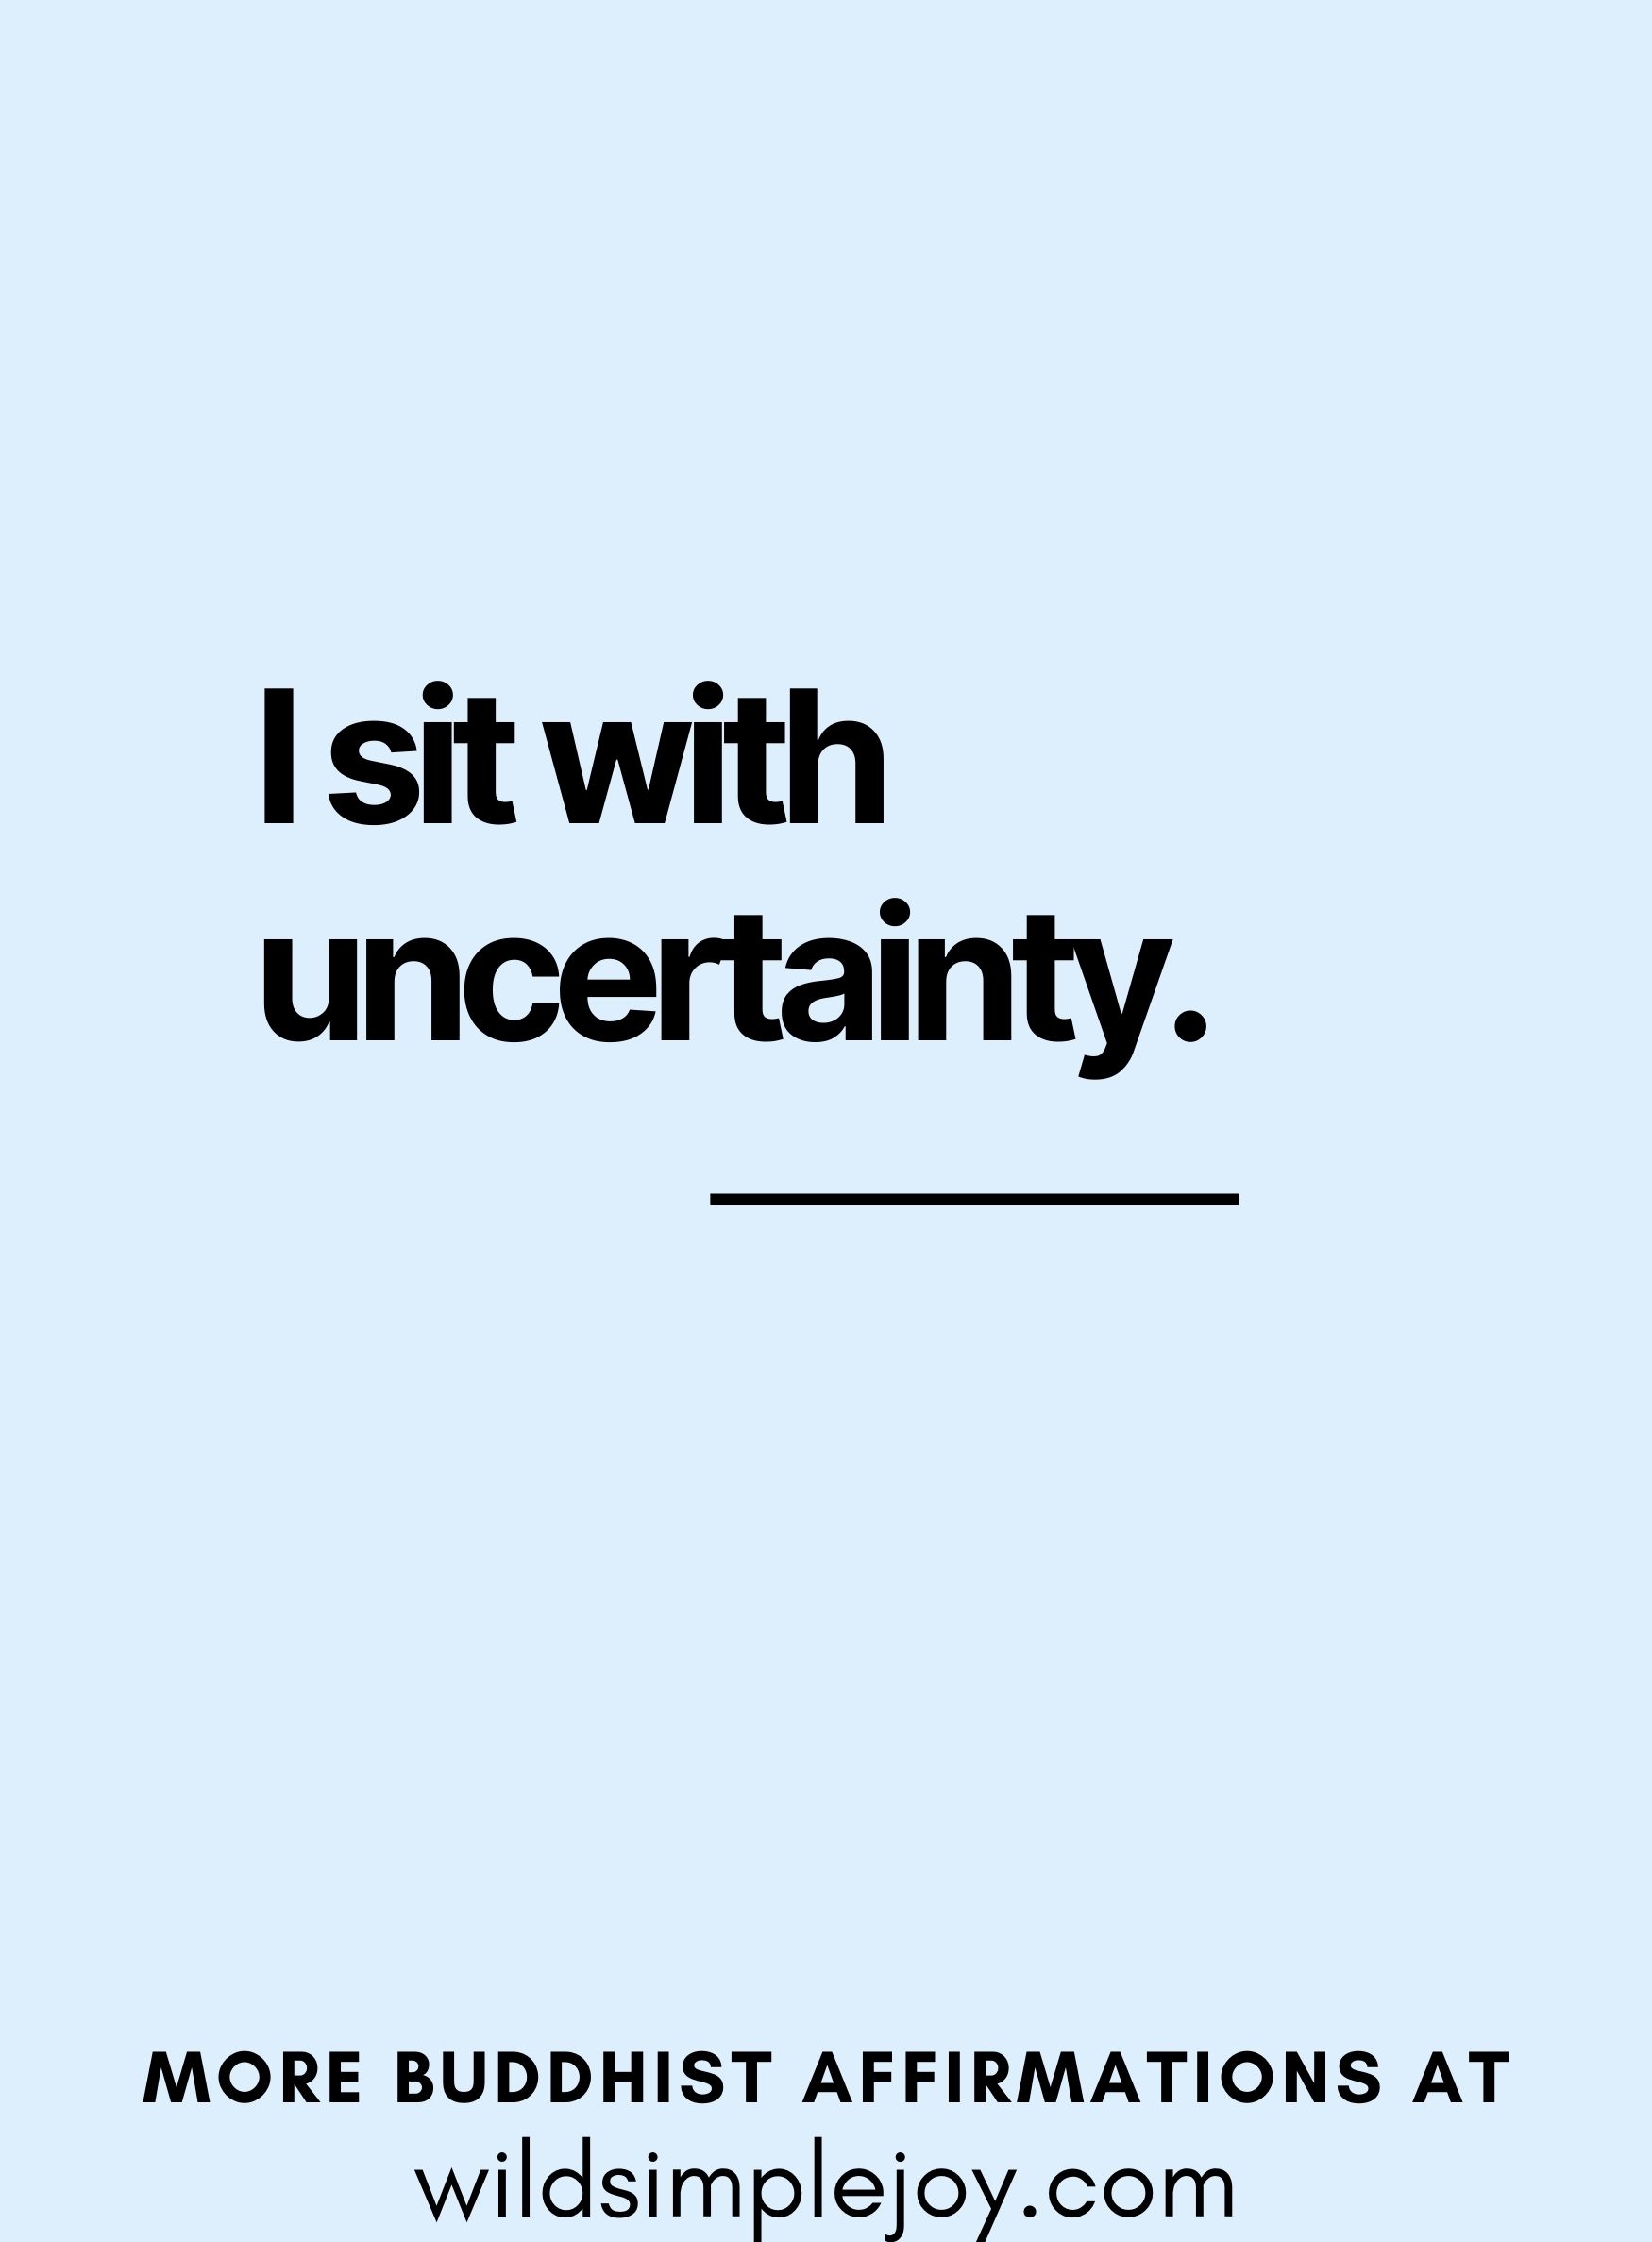 I sit with uncertainty. (on a blue background)